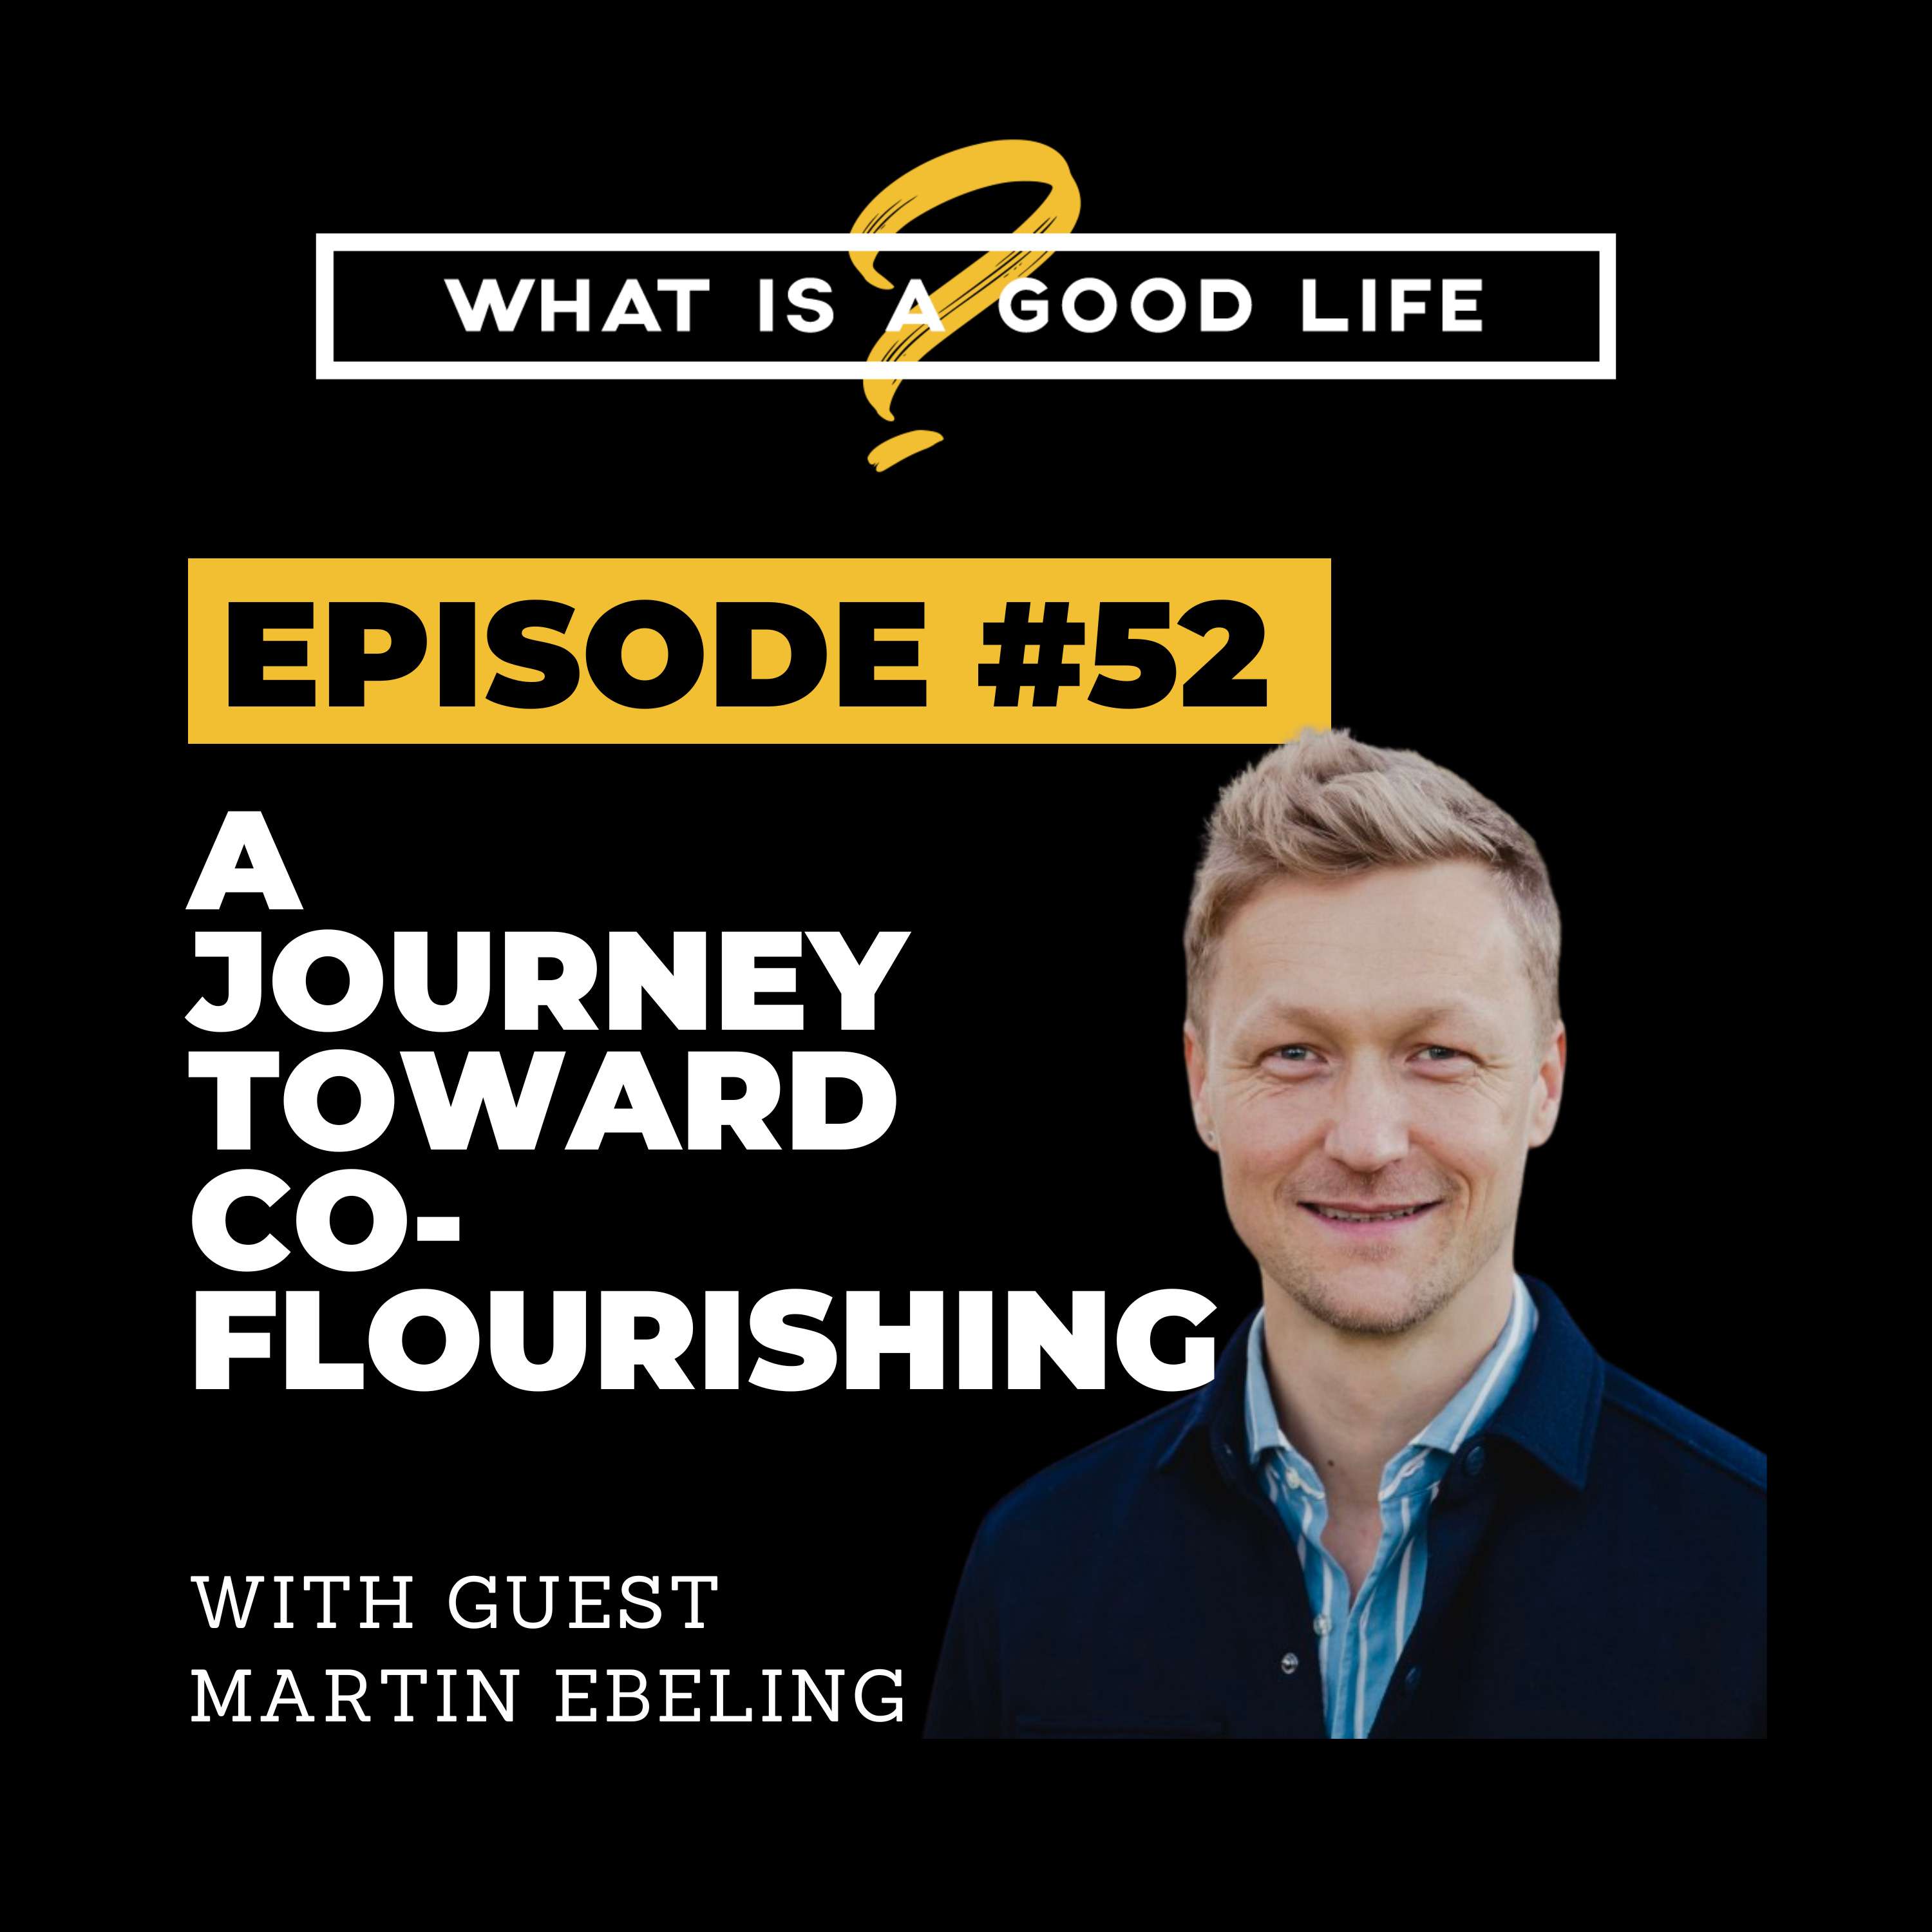 What is a Good Life? #52 - A Journey Toward Co-Flourishing with Martin Ebeling